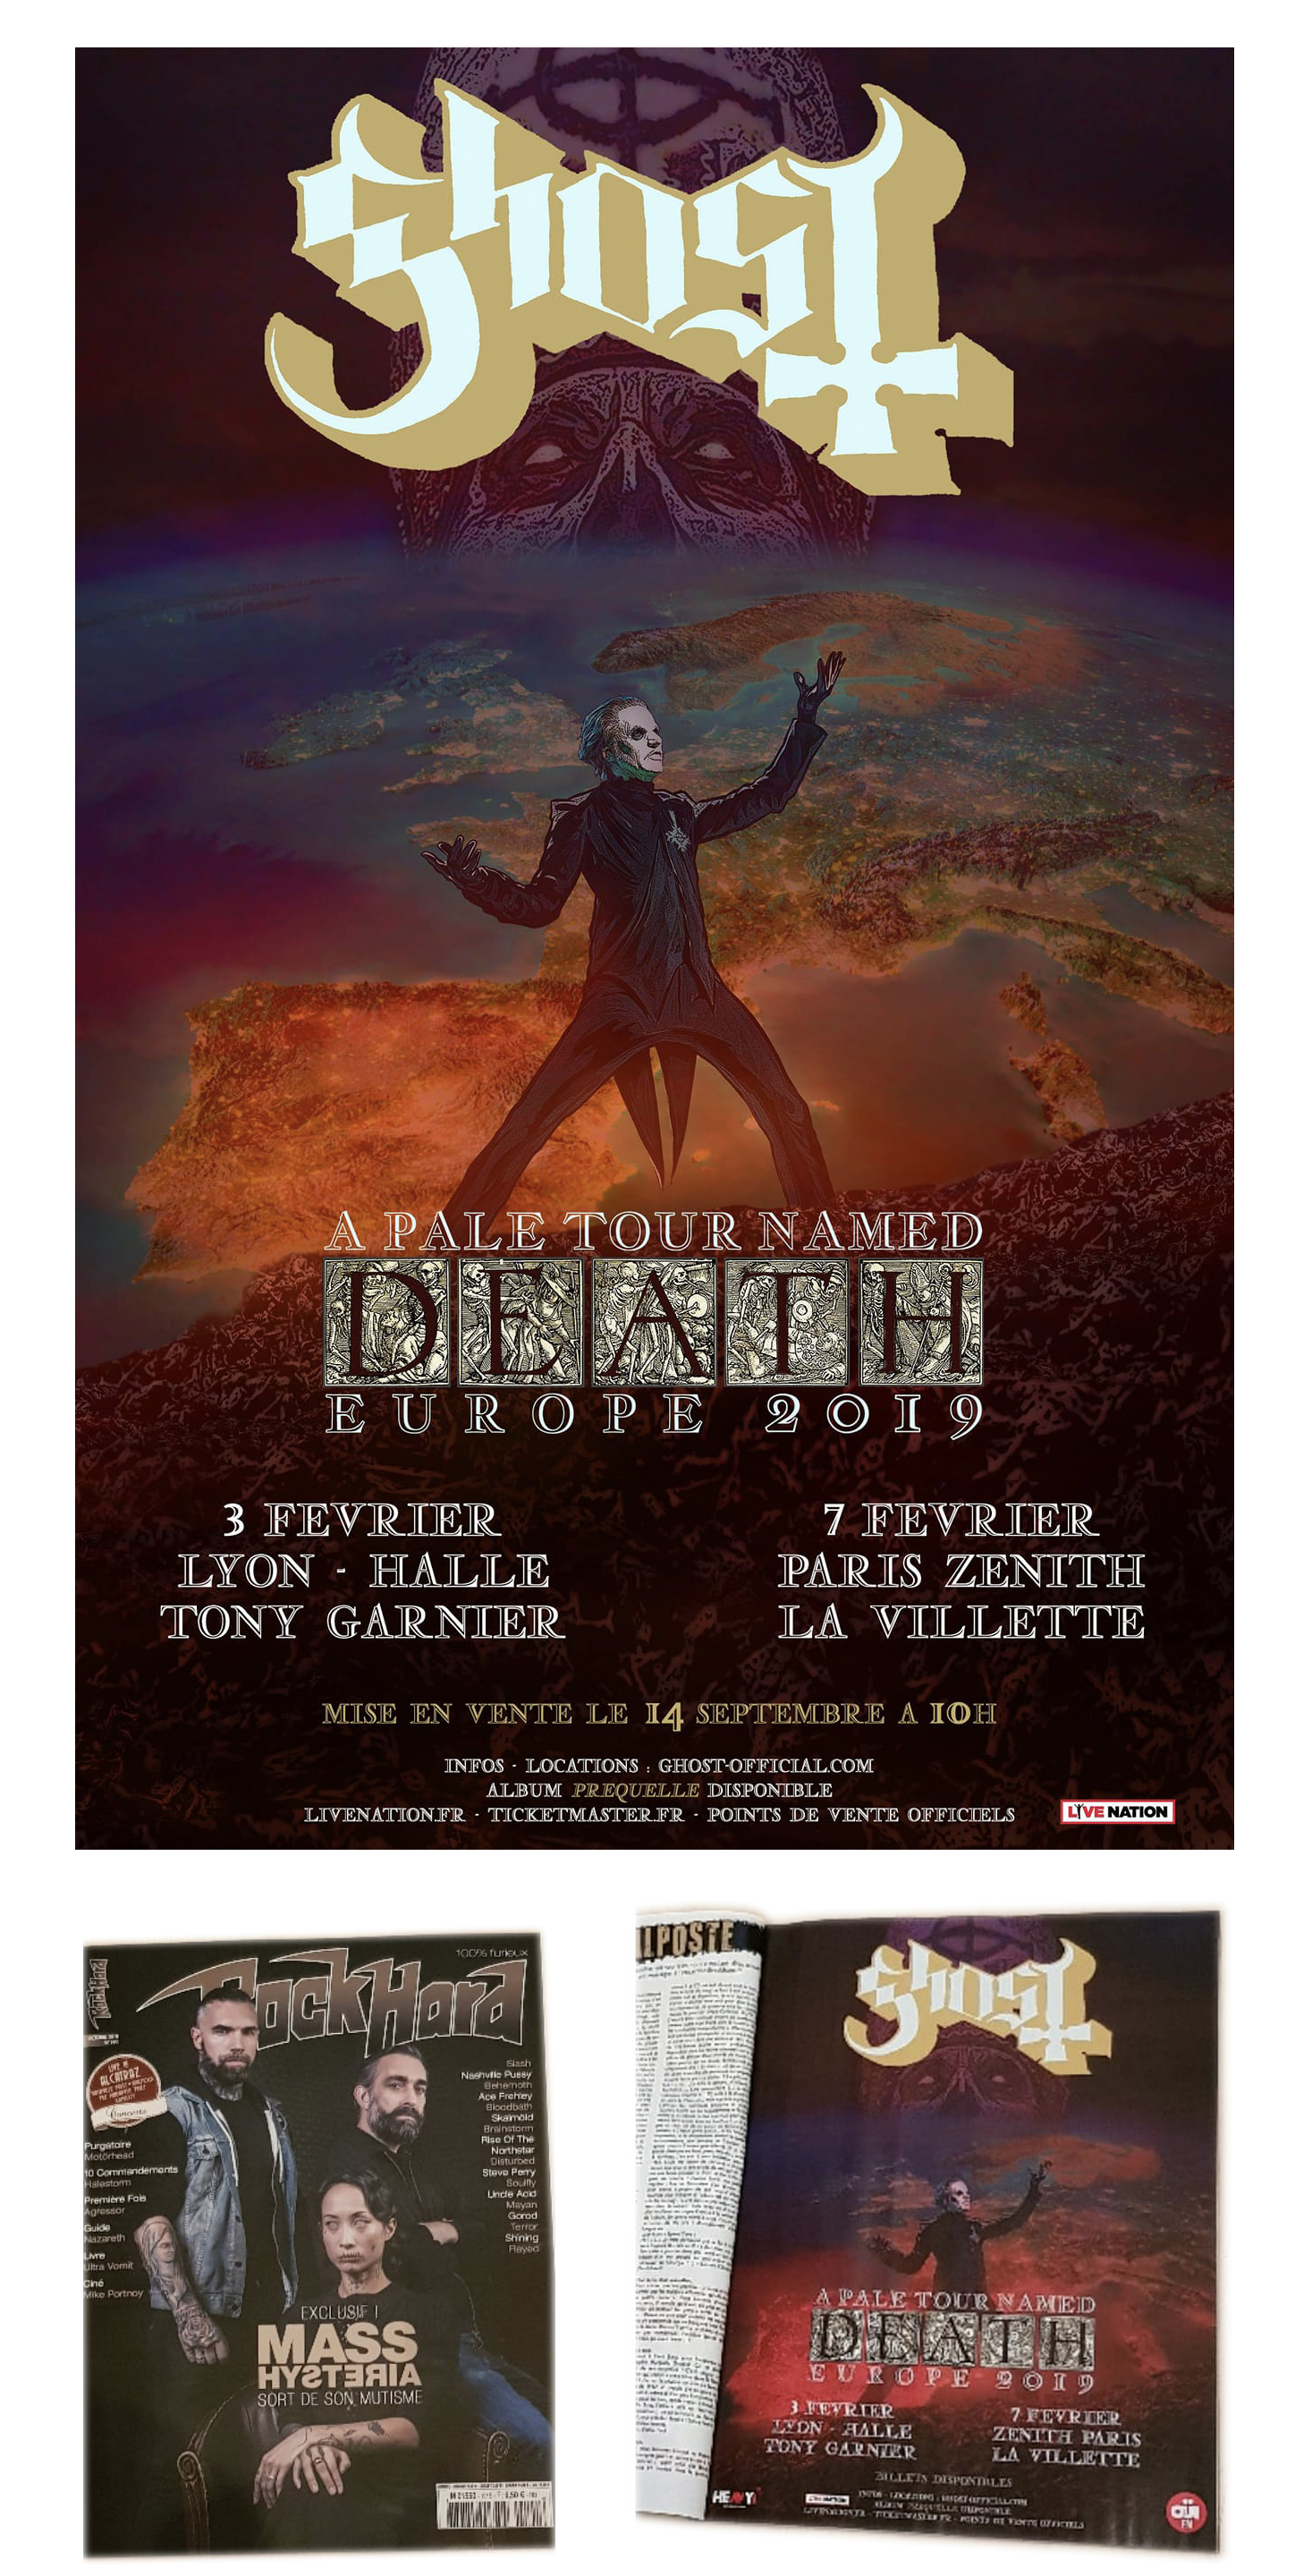   GHOST | A Pale Tour named Death 2019 France poster |    Rock Hard France magazine advert | October 2018 (issue #191)   Official concert promo  